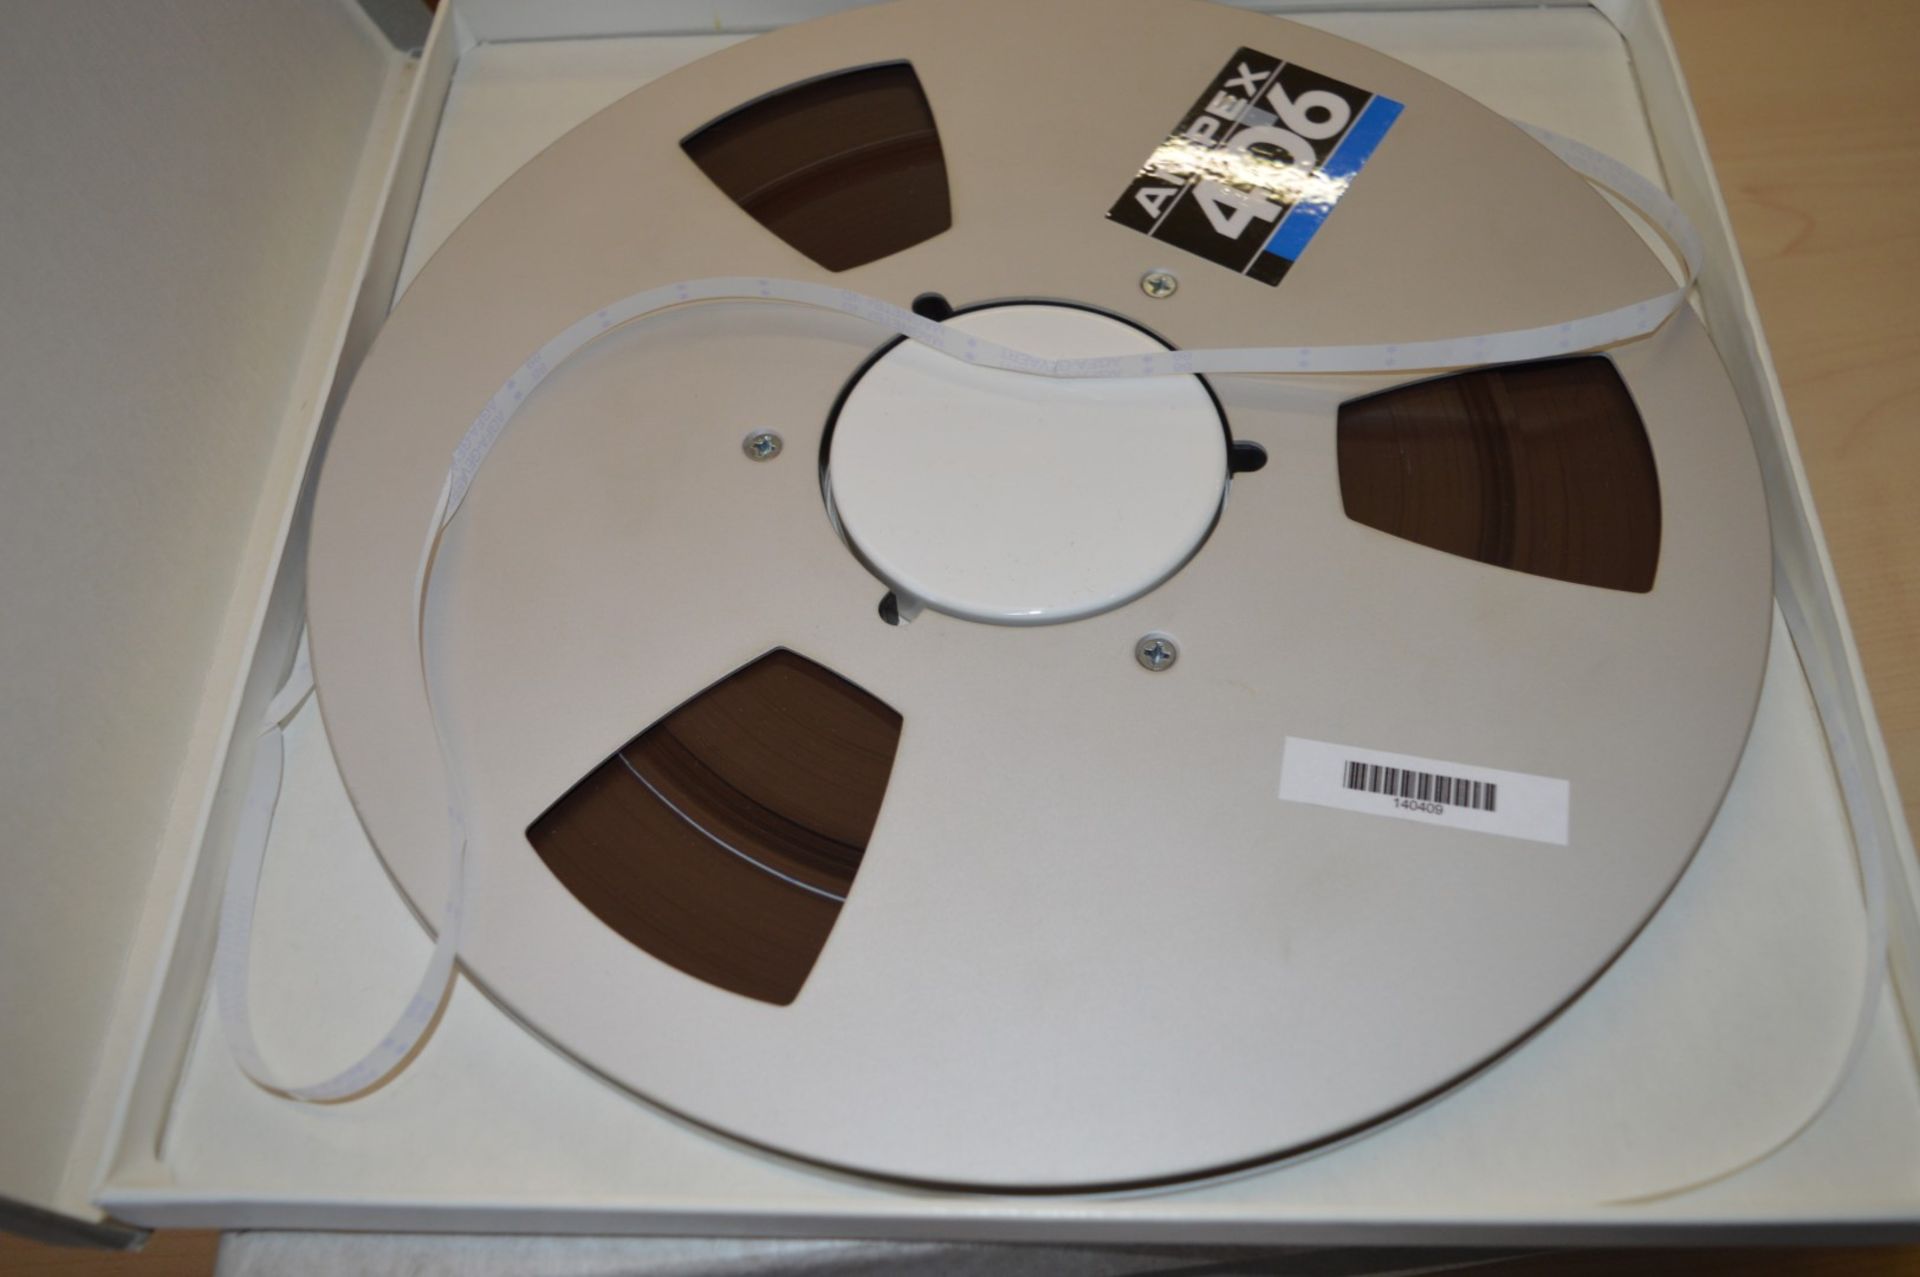 10 x Ampex 406 Reel to Reel Spools With Tape and Original Boxes - CL185 - Ref DRT0039 - Location: - Image 18 of 28